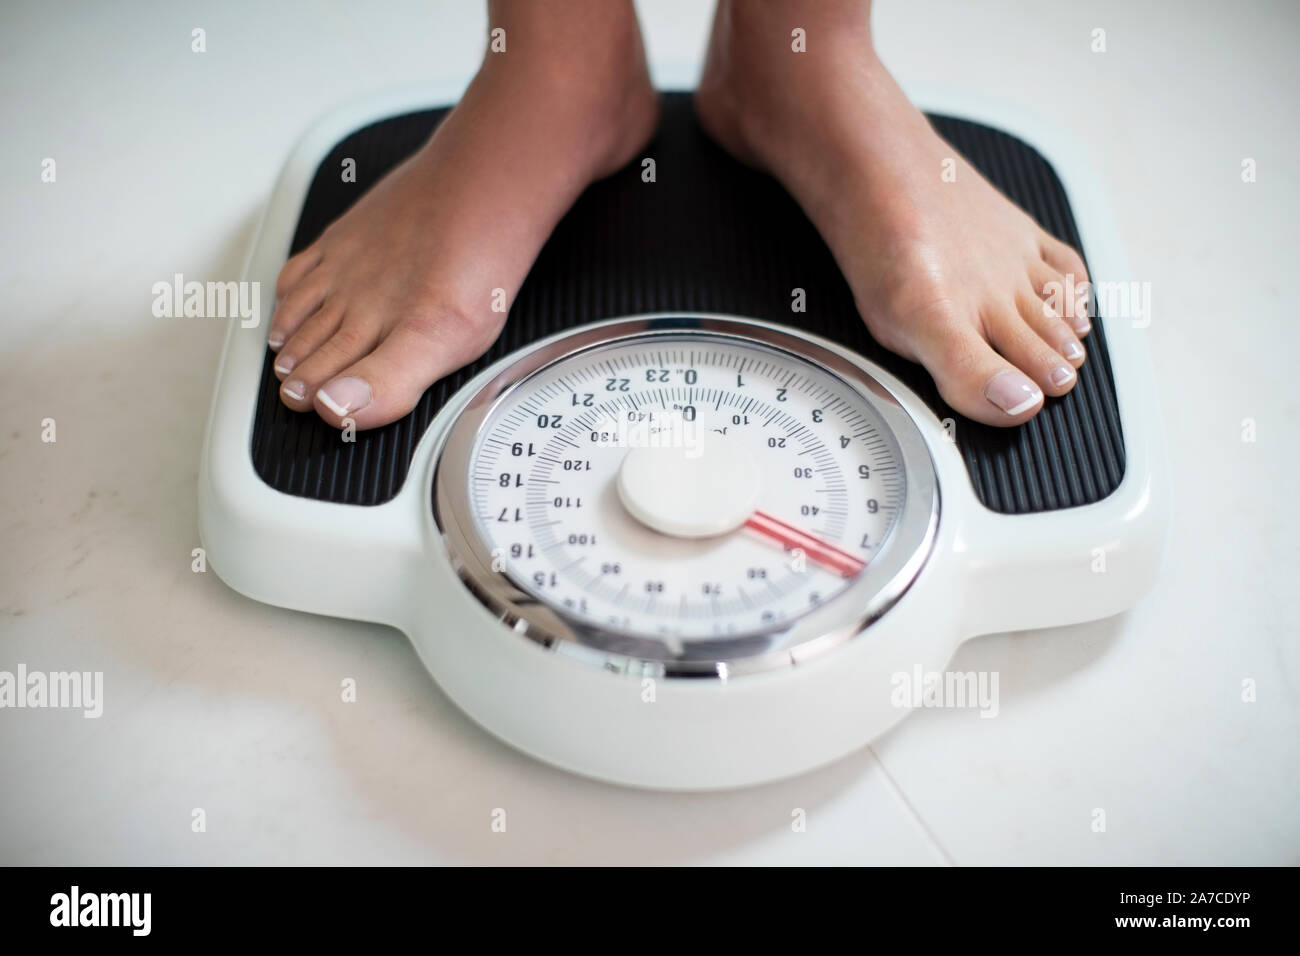 Close Up Of Woman Standing On Bathroom Scales At Home Stock Photo